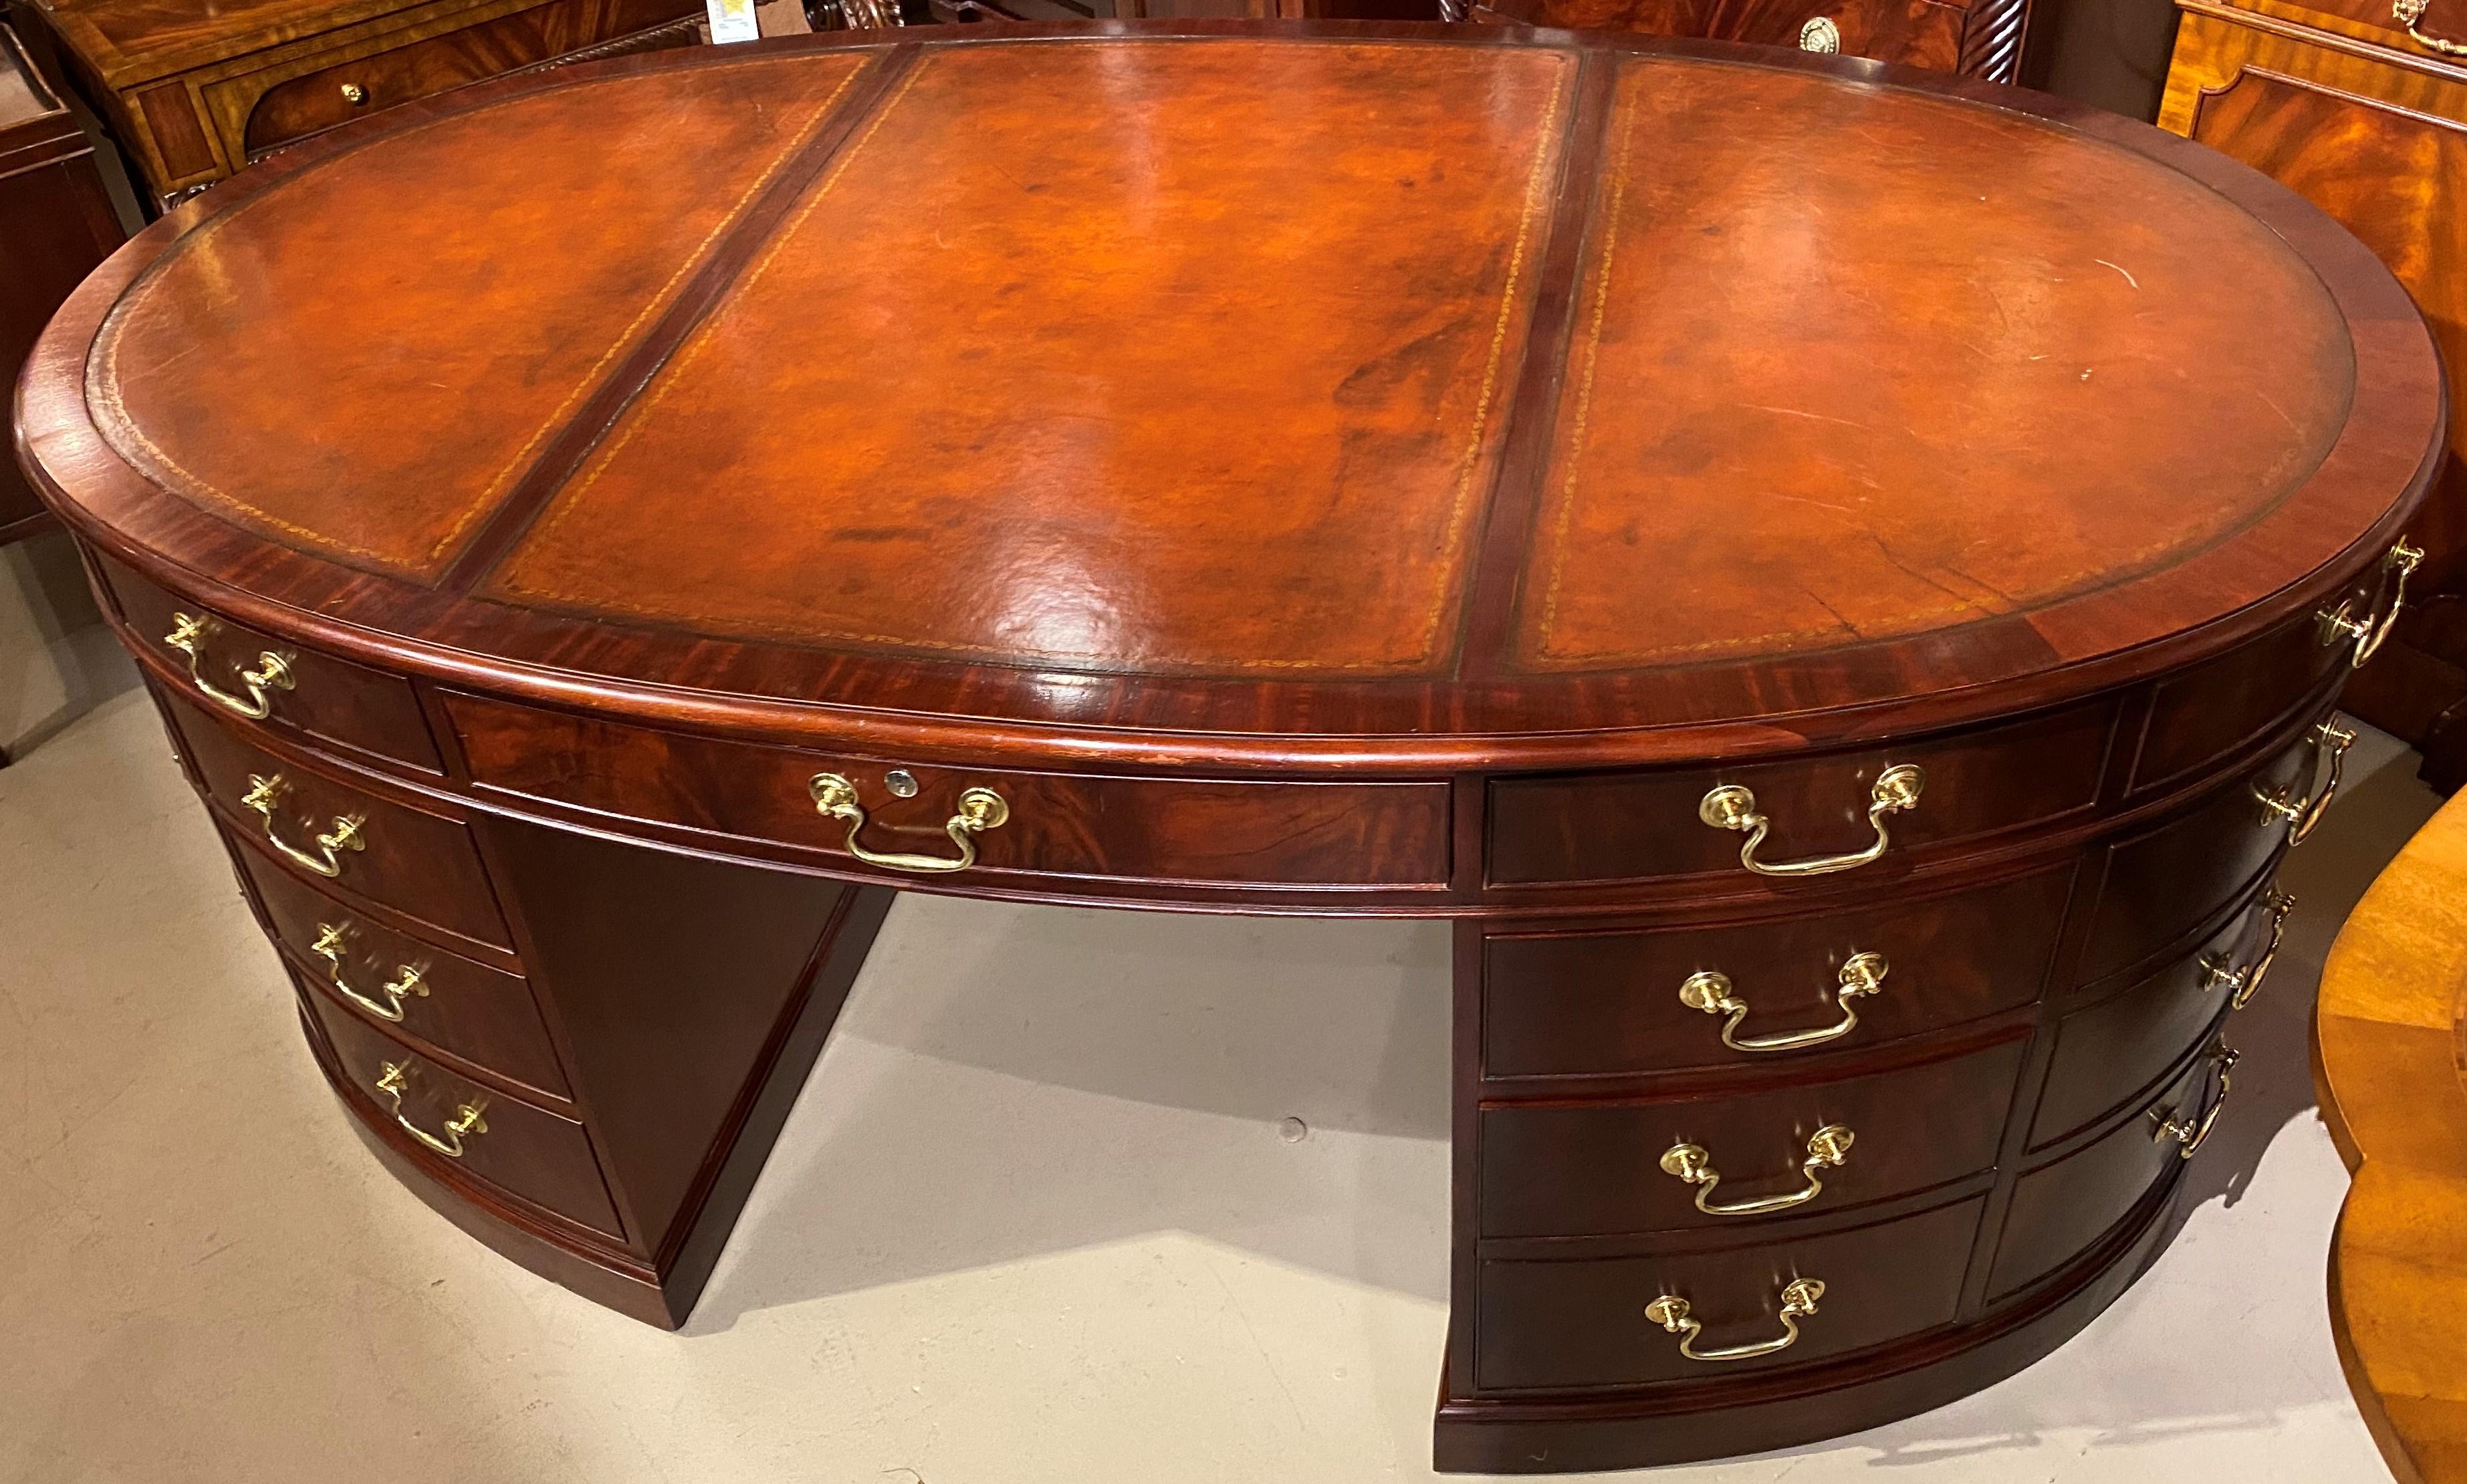 A fine quality oval mahogany partners desk by Baker Furniture Company with three-section brown leather top with gilt tooled border, one side with eight cockbeaded drawers, including a deep file drawer on the right side, and the other side with a